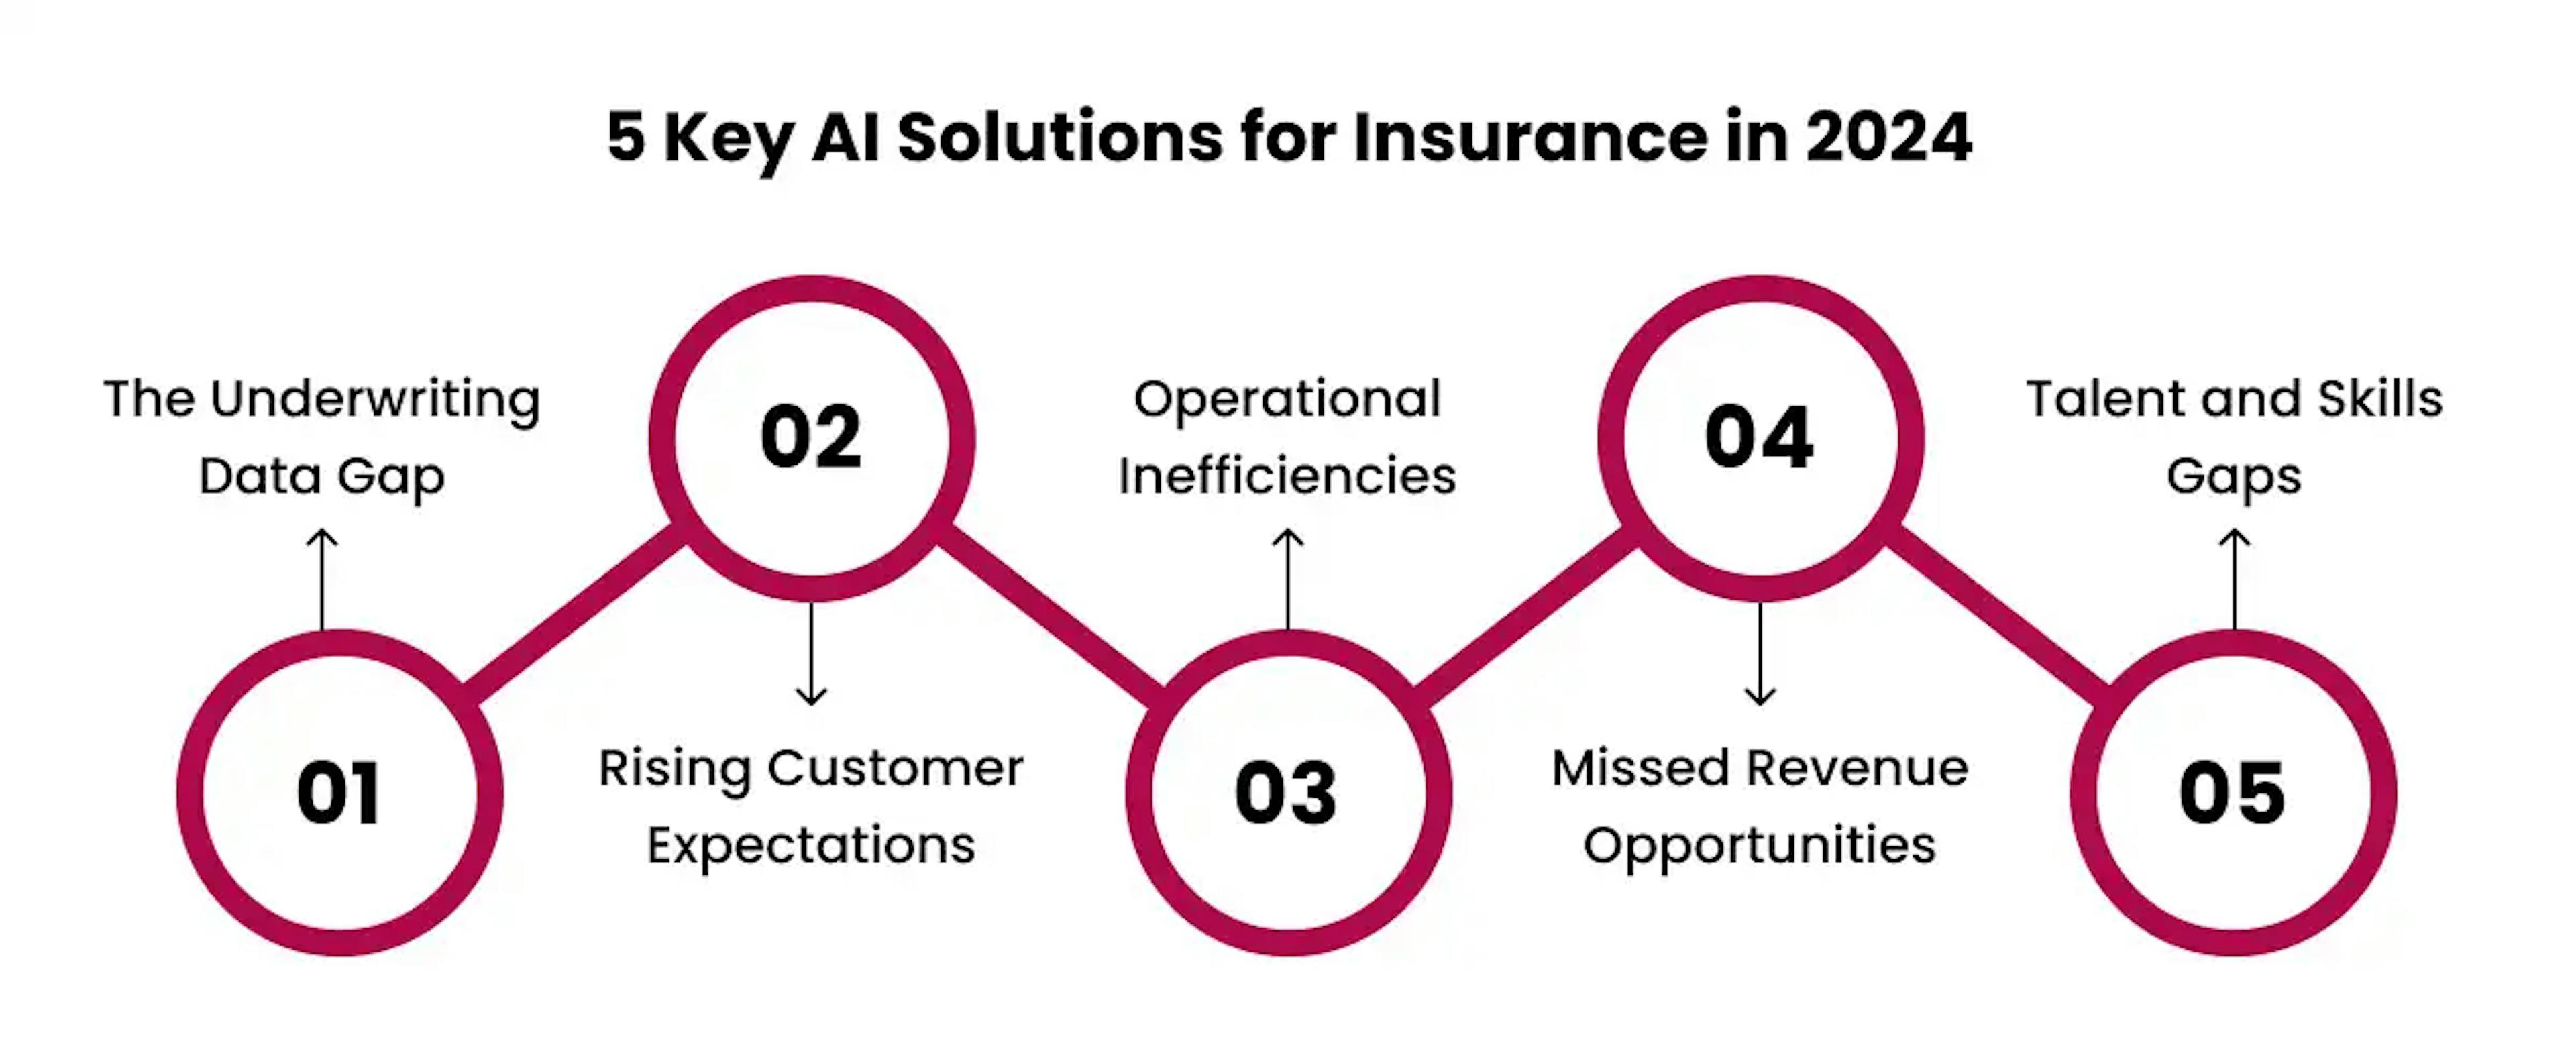 5 Key AI Solutions for Insurance in 2024